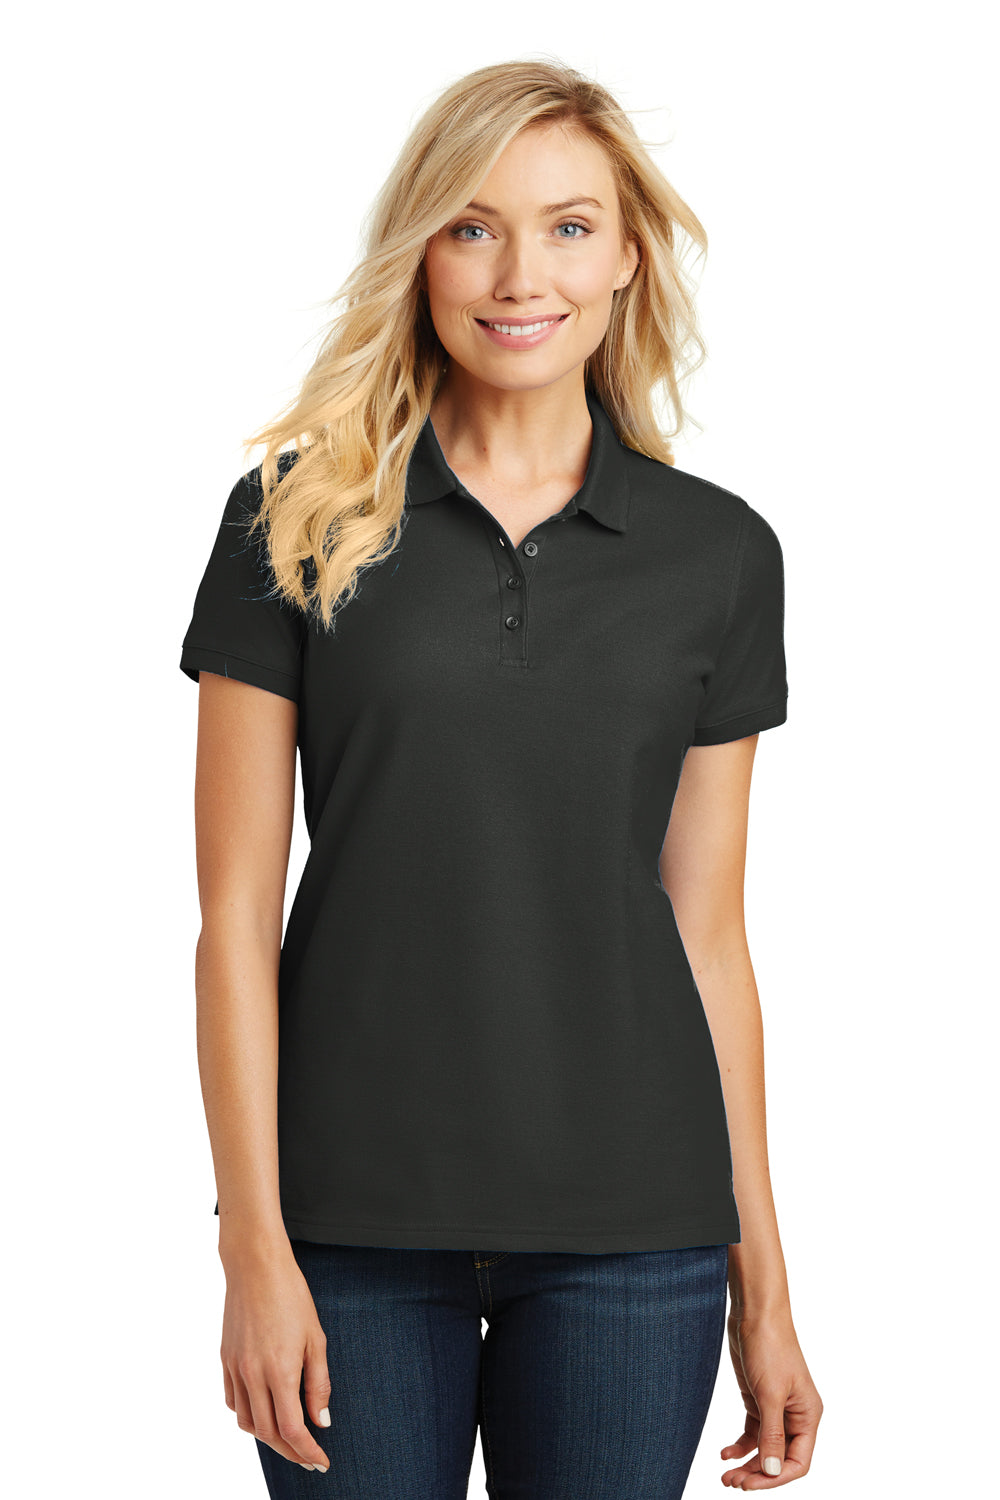 Port Authority L100 Womens Core Classic Short Sleeve Polo Shirt Black Front